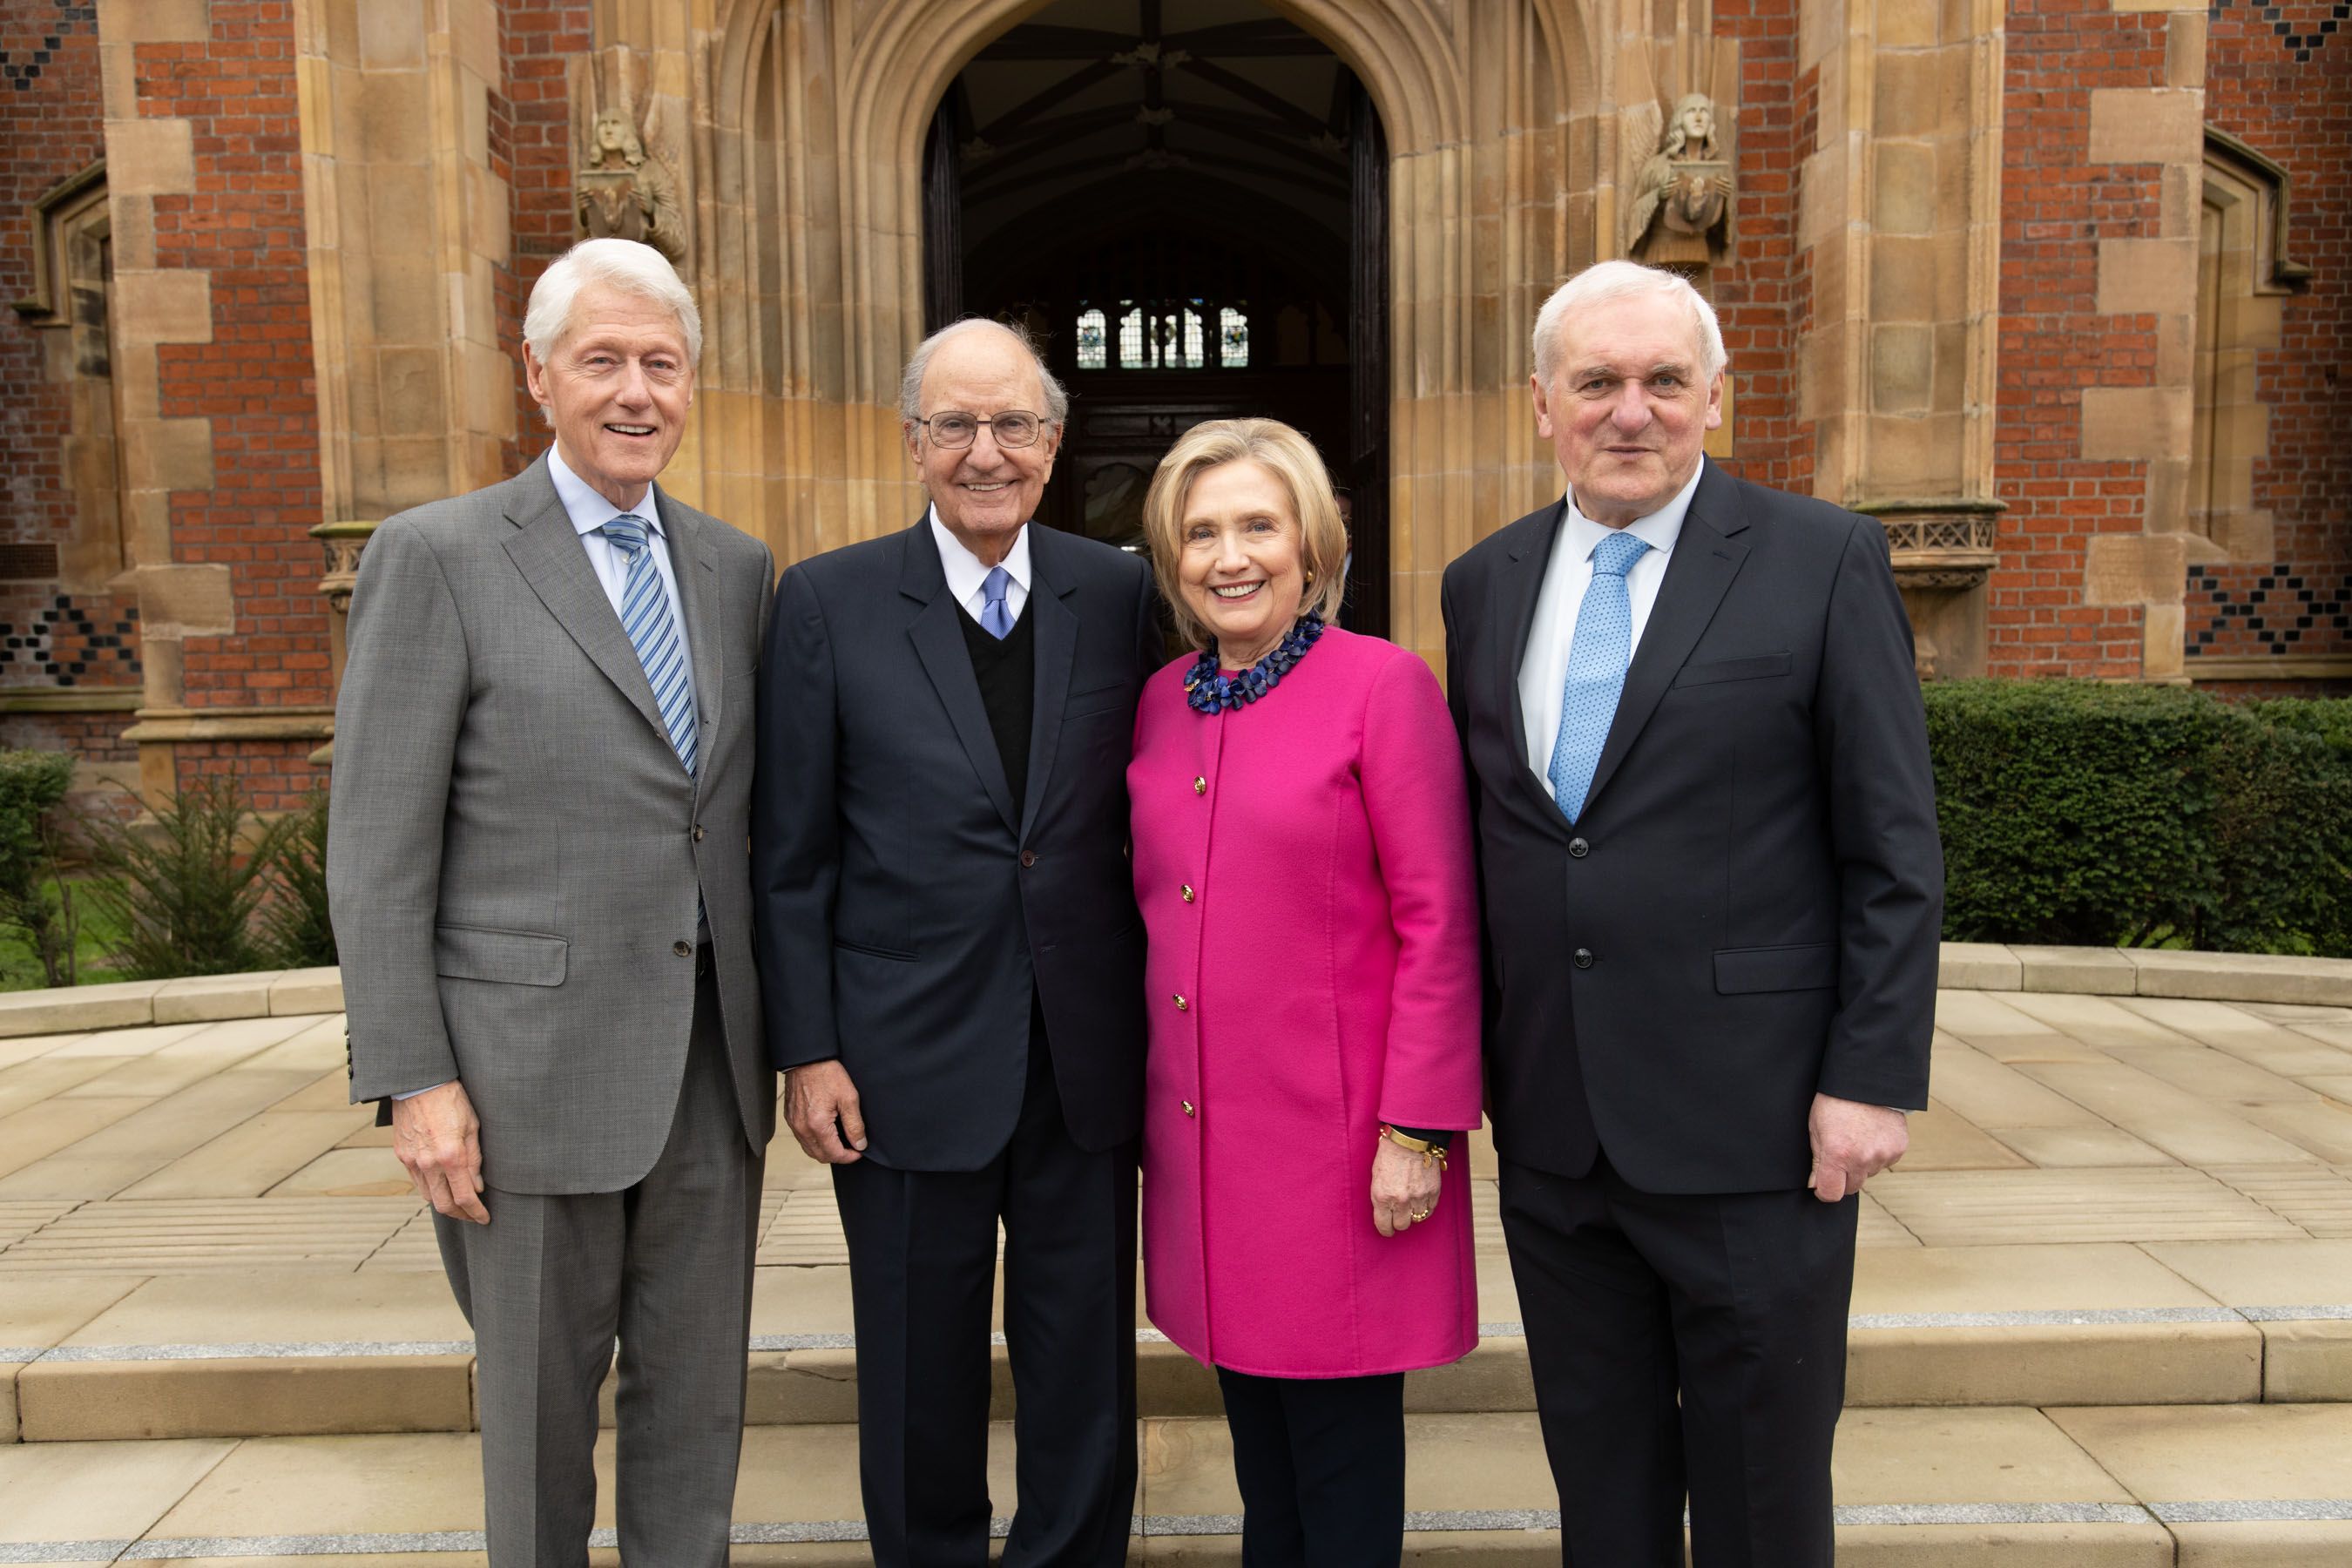 GATHERING: President Clinton, George Mitchell, Hillary Clinton and Bertie Ahern were at Queen\'s University for the GFA anniversary events where unionism heard some hard truths